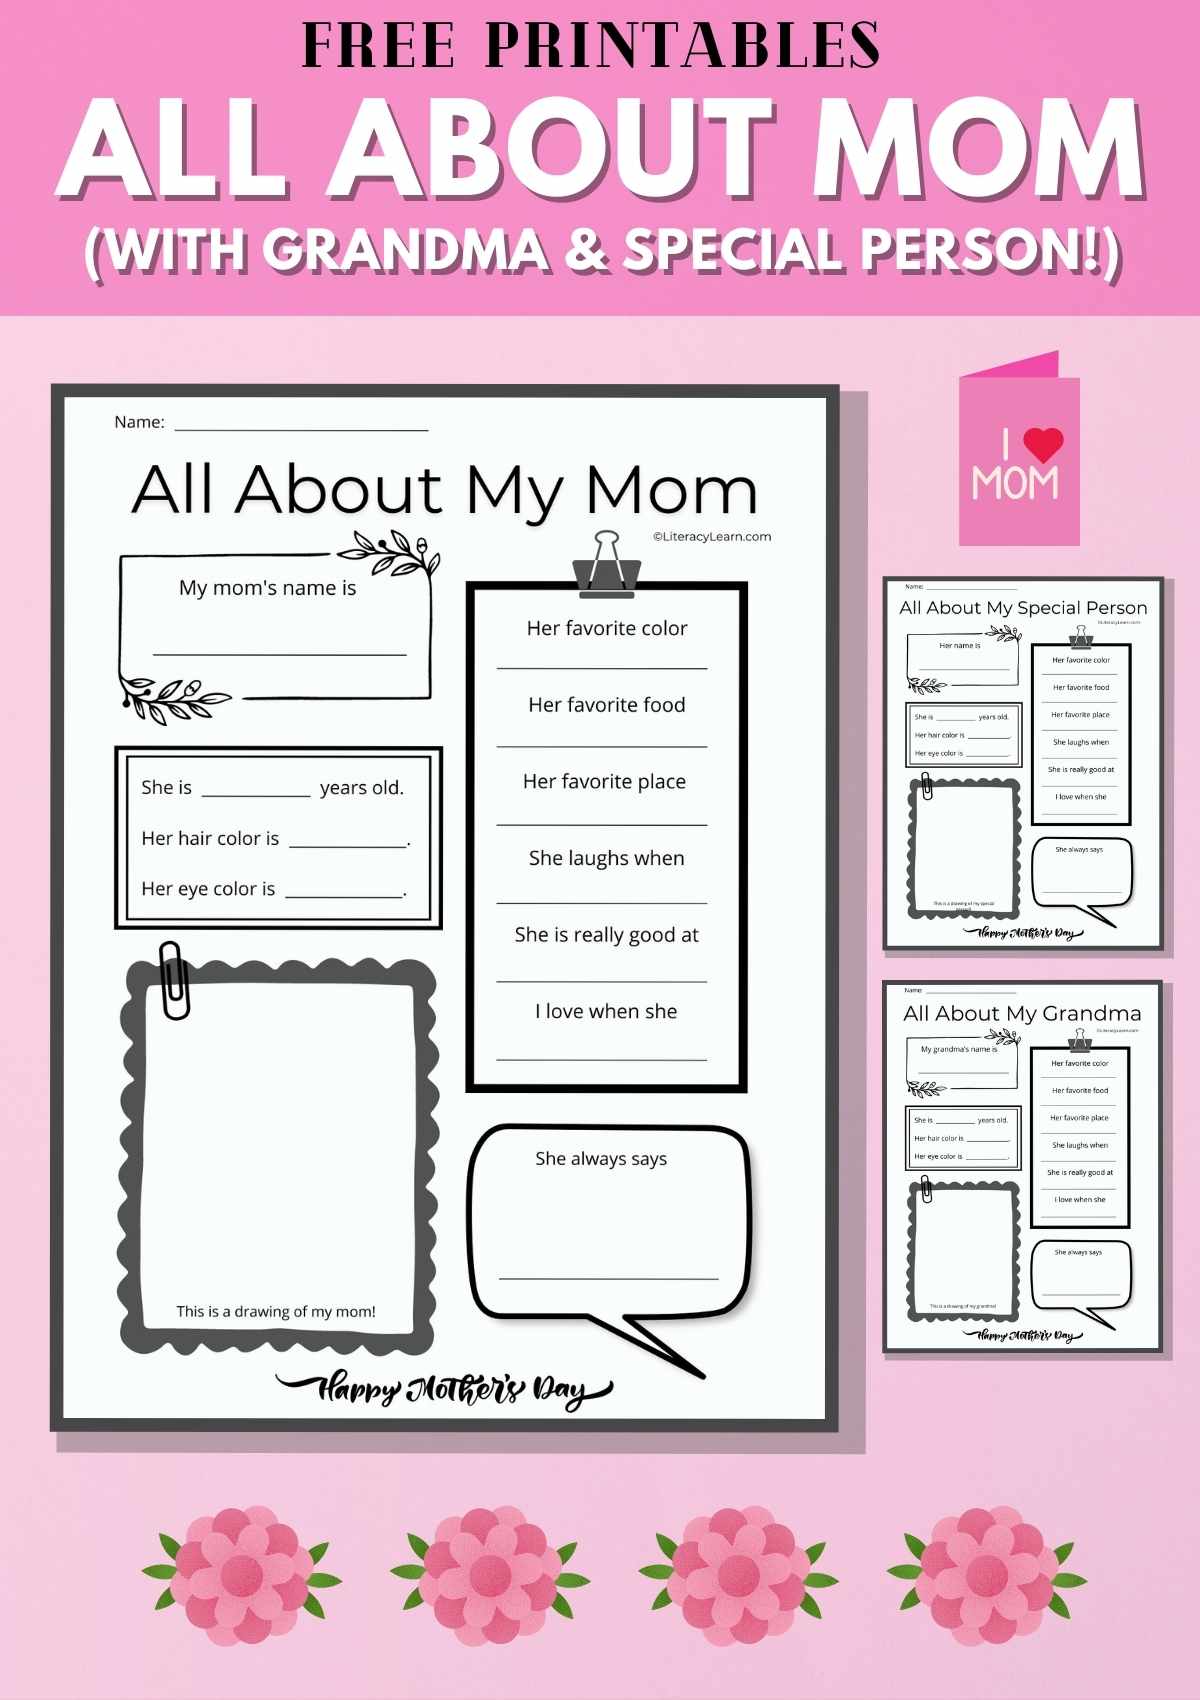 Pinterest graphic with three printable "All About My Mom" worksheets with flowers.